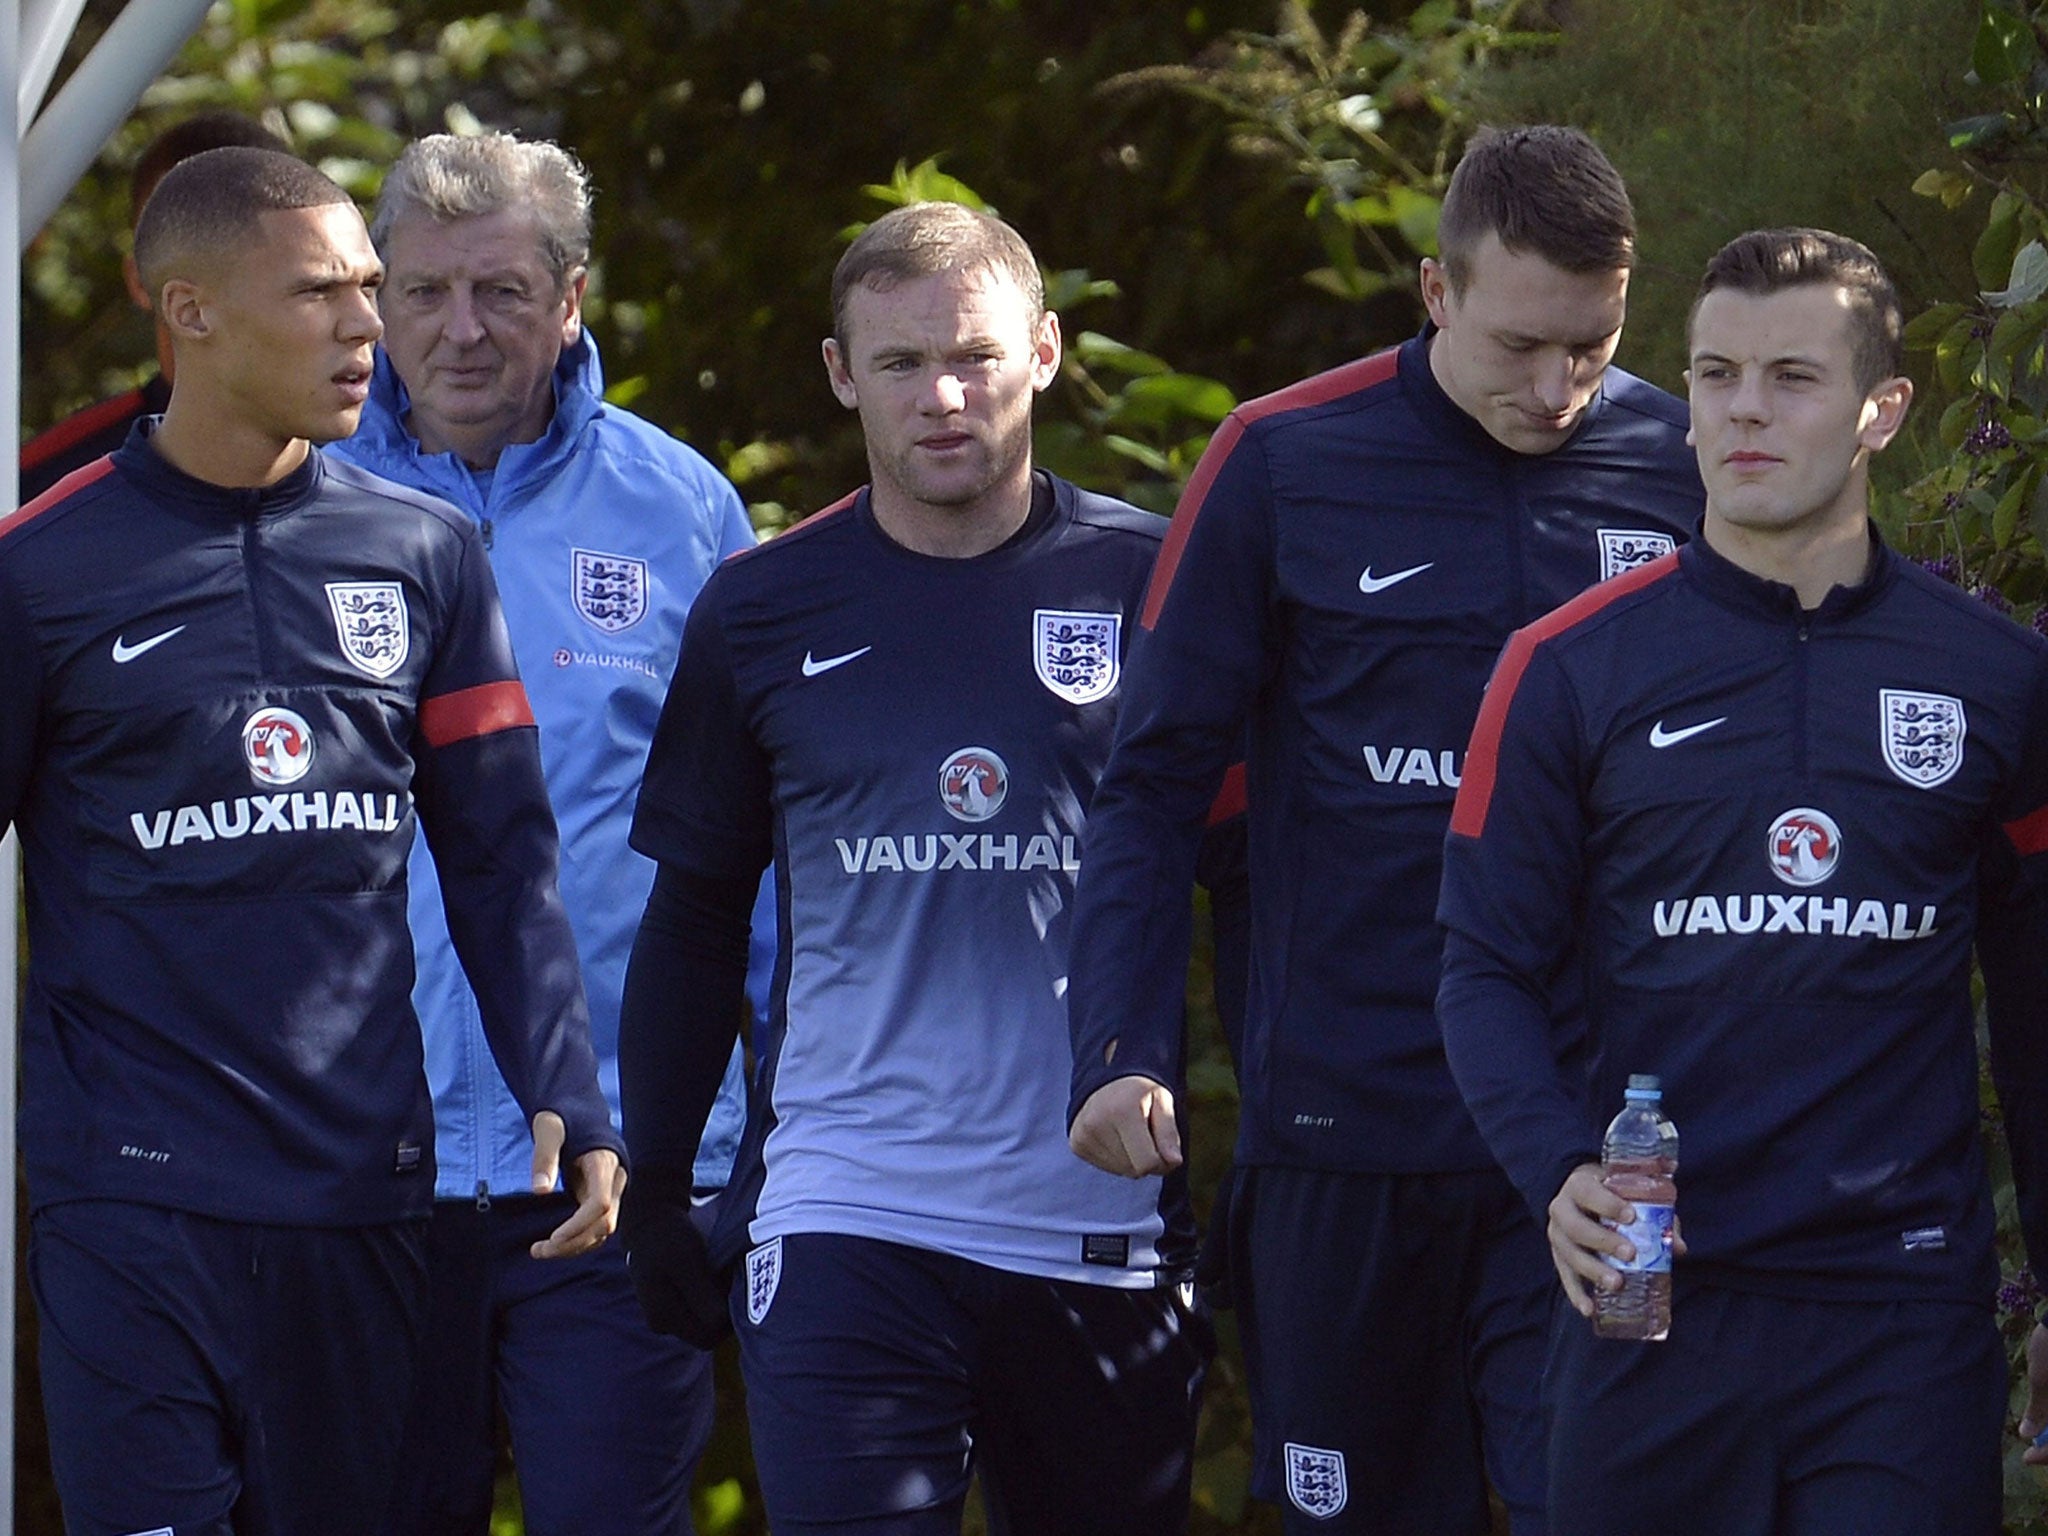 The England manager, Roy Hodgson (second left), looks on as players (from left) Kieran Gibbs, Wayne Rooney, Phil Jones and Jack Wilshere head out for training at London Colney 